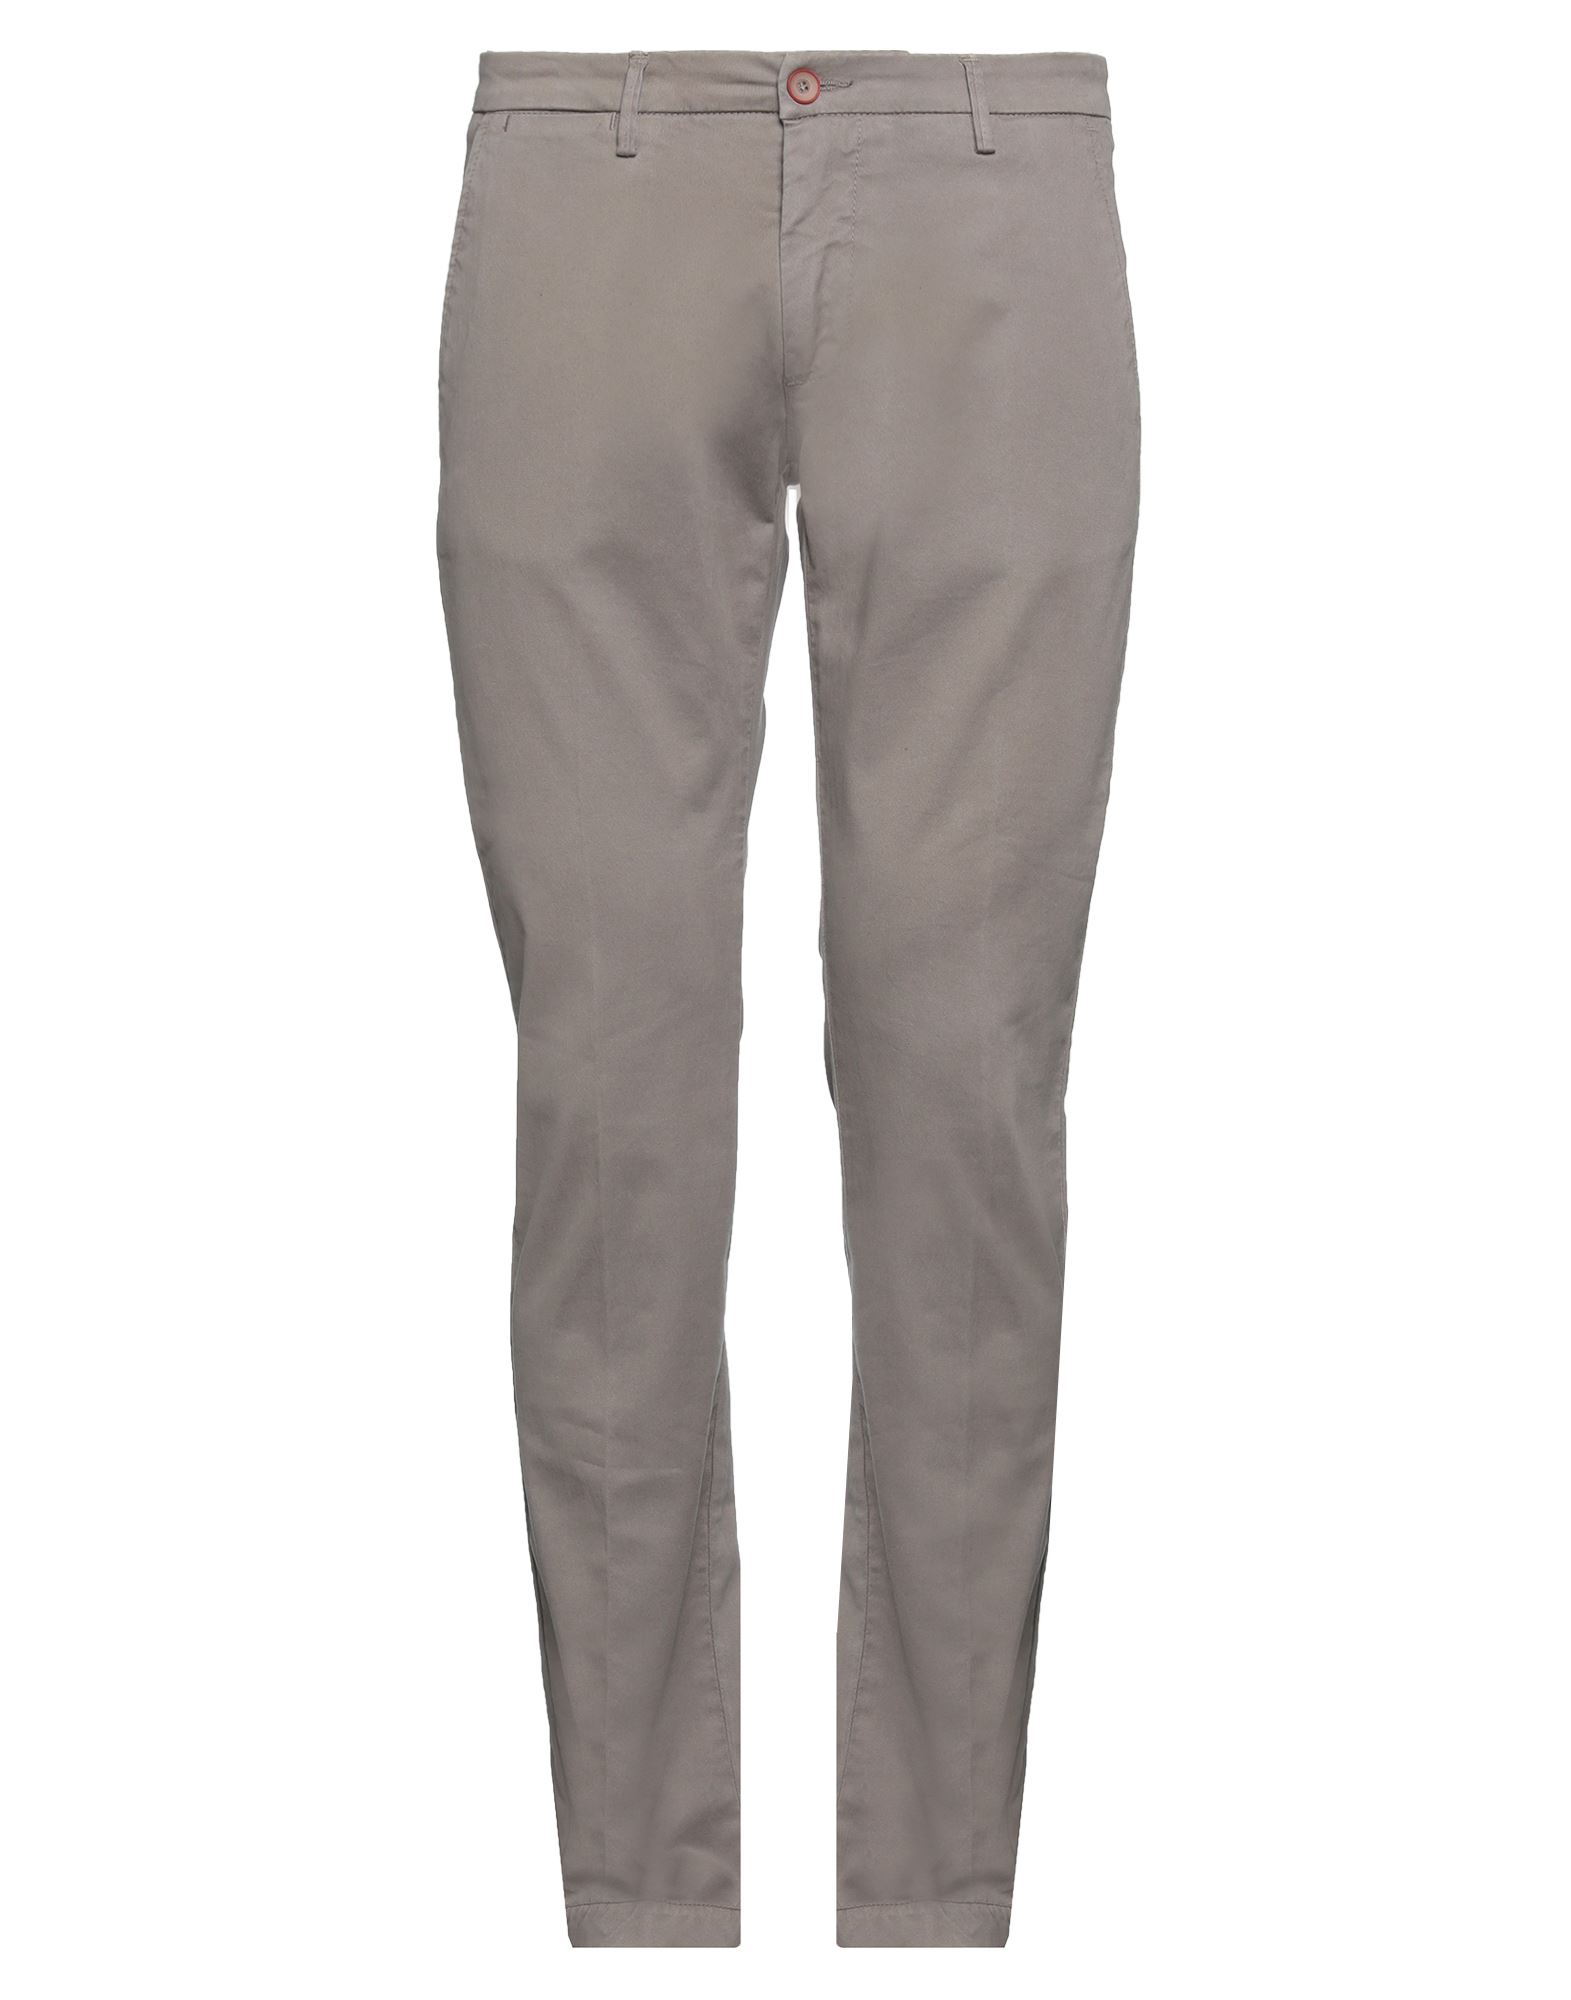 Our Fly Pants In Beige